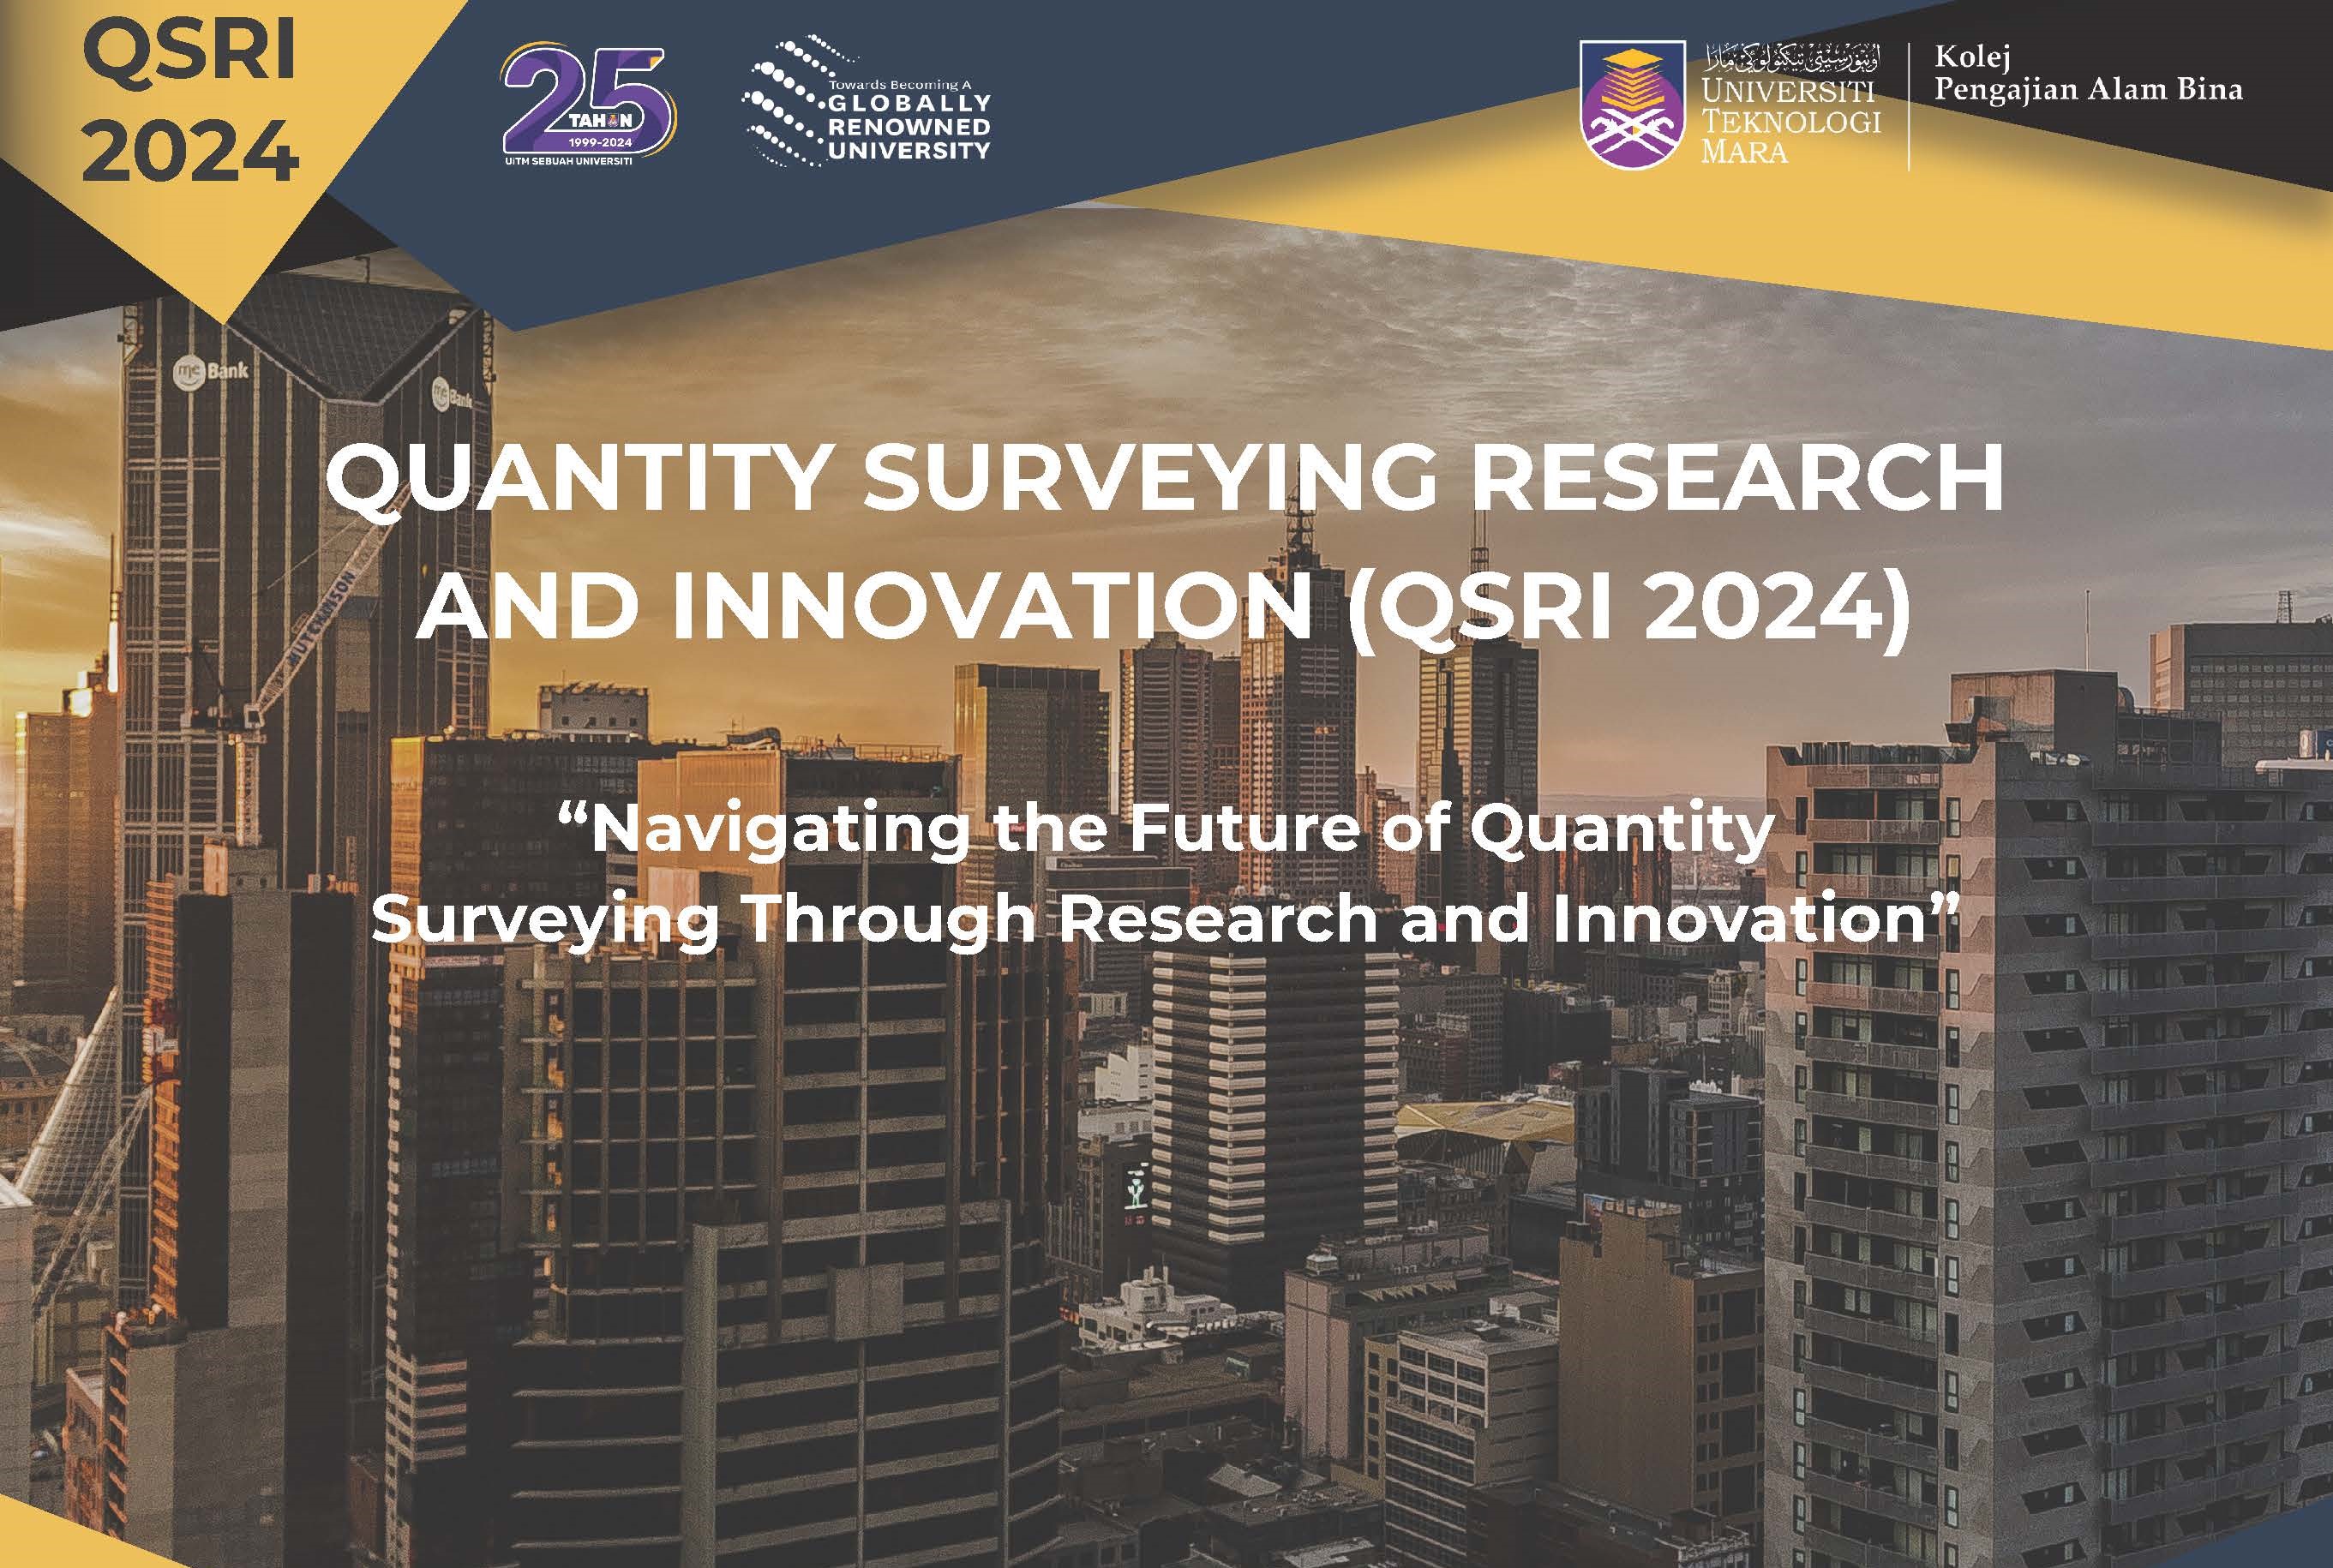 QUANTITY SURVEYING RESEARCH AND INNOVATION 2024 (QSRI 2024)